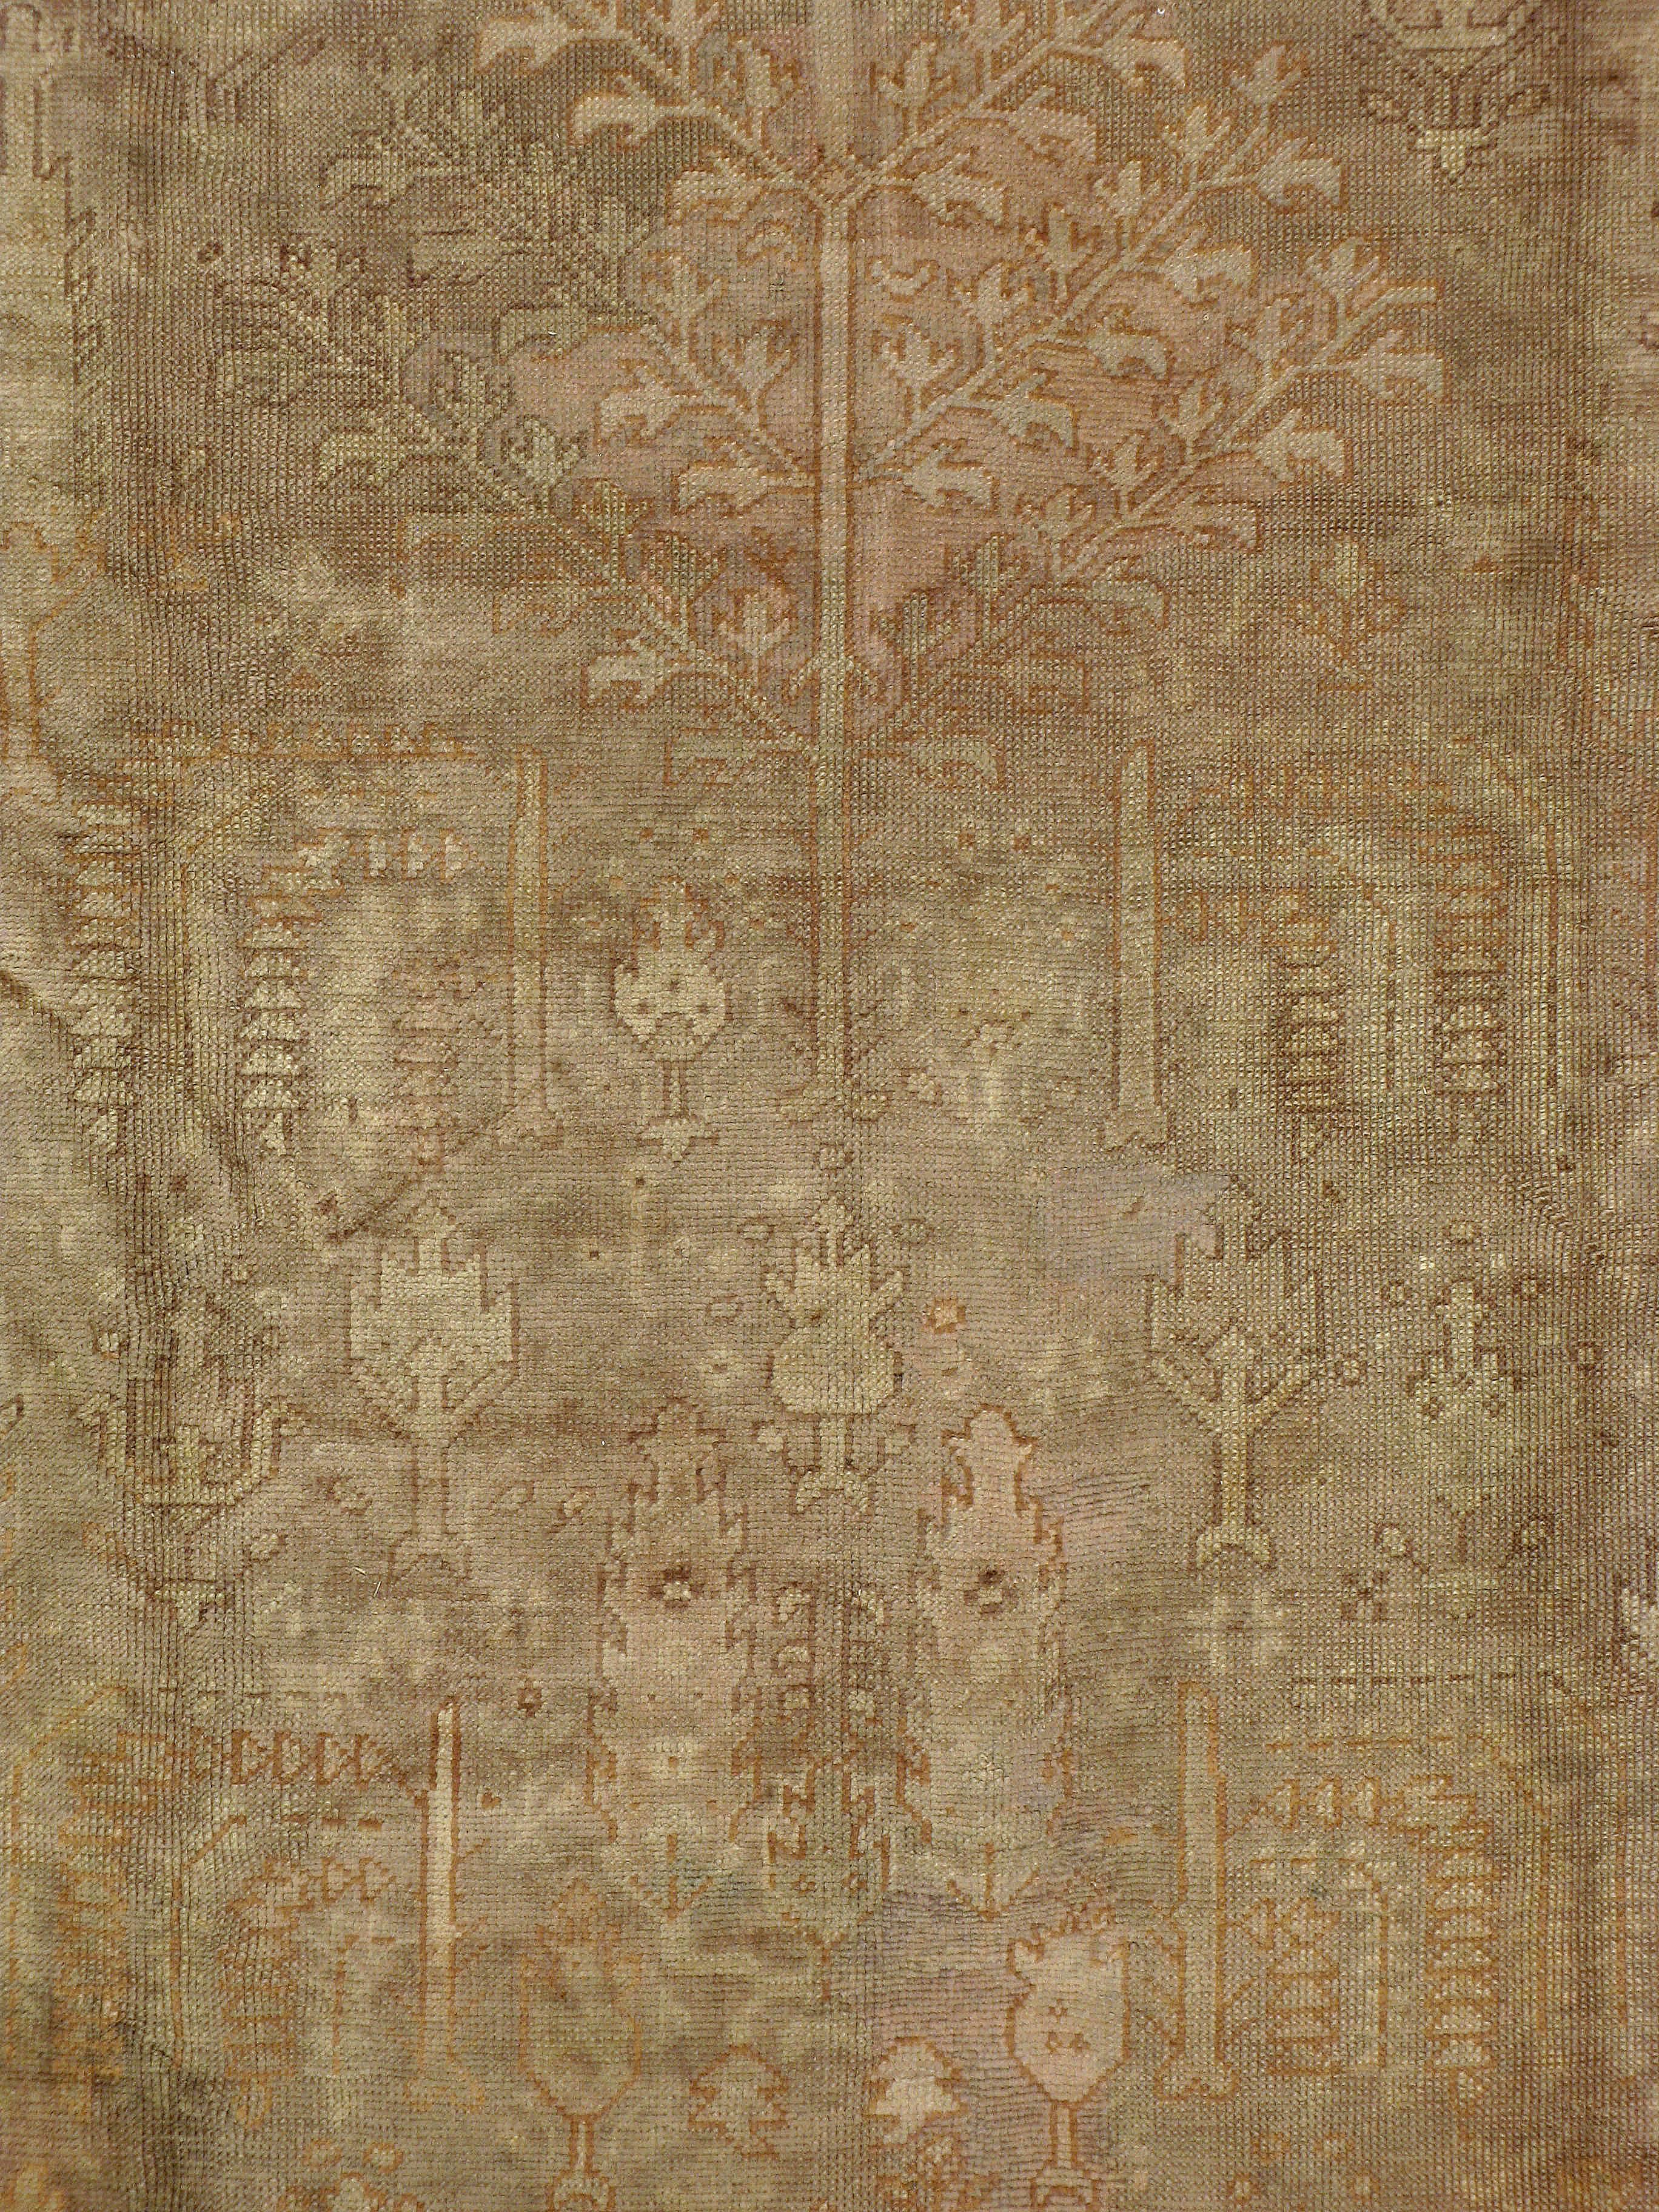 An antique Turkish Oushak carpet from the second quarter of the 20th century. It's weathered appeal works well with vintage decor.